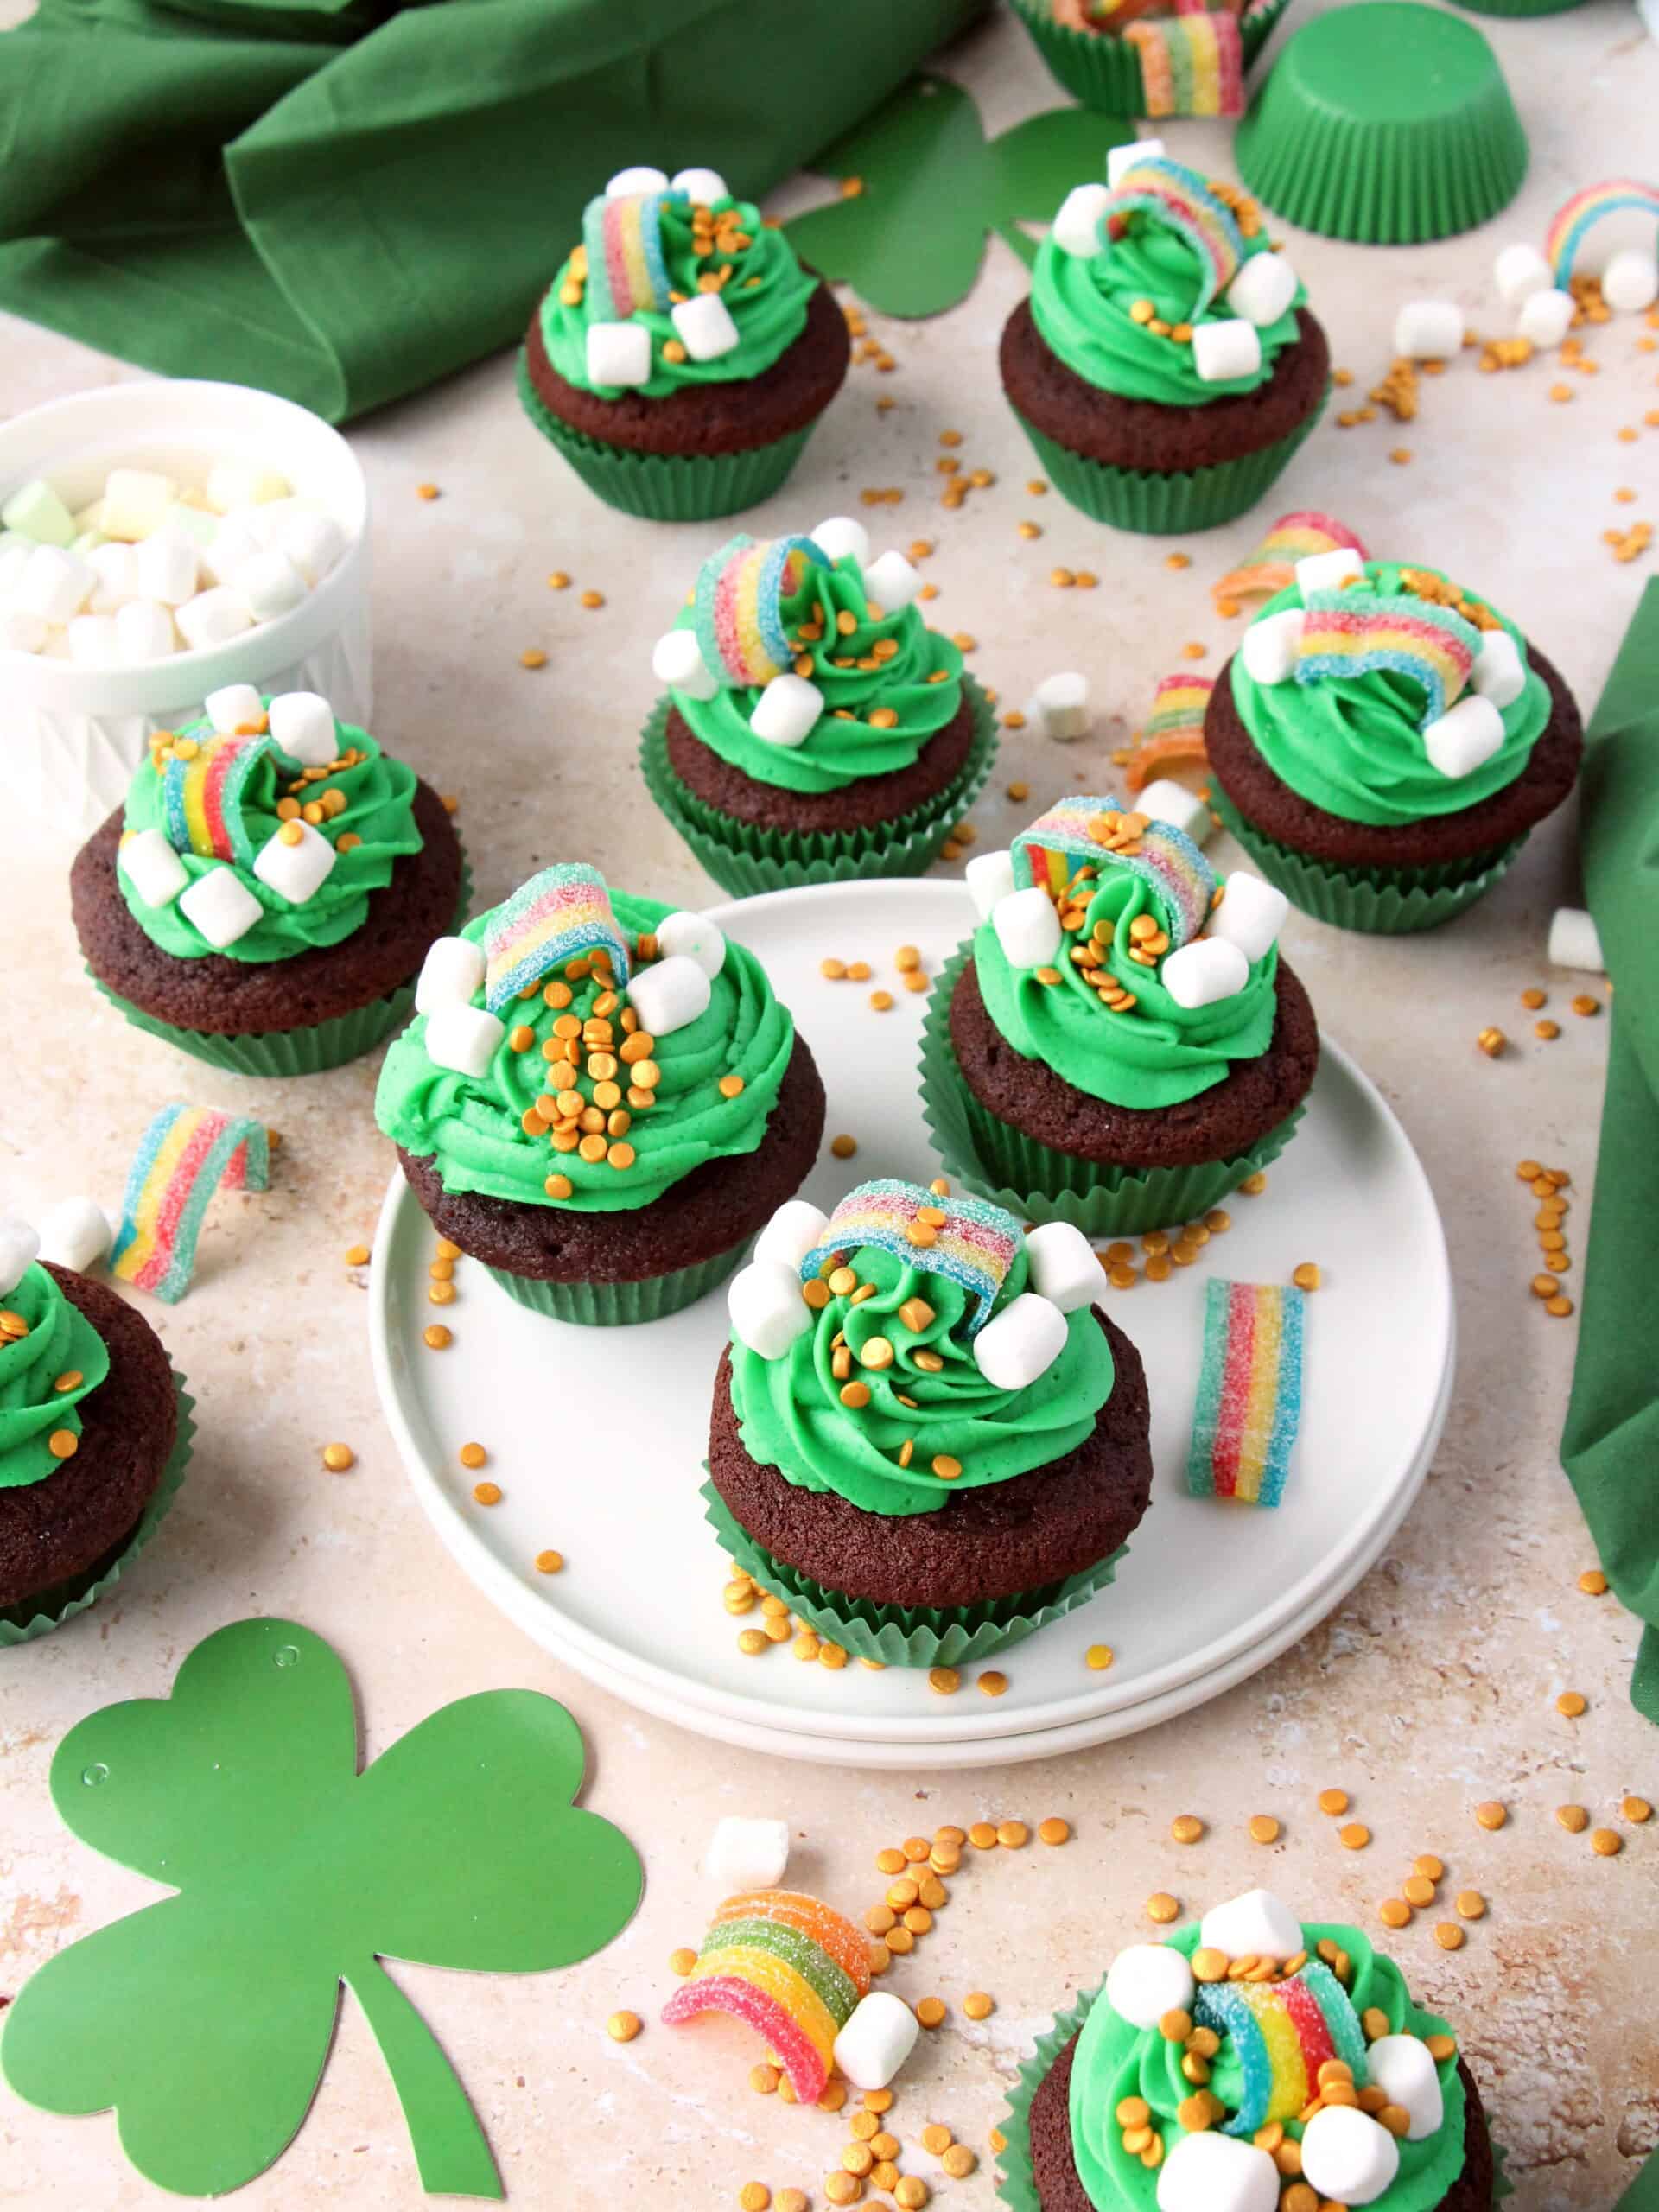 st patrick's day cupcakes on white plate. Golden sugar candies around with rainbow candies.